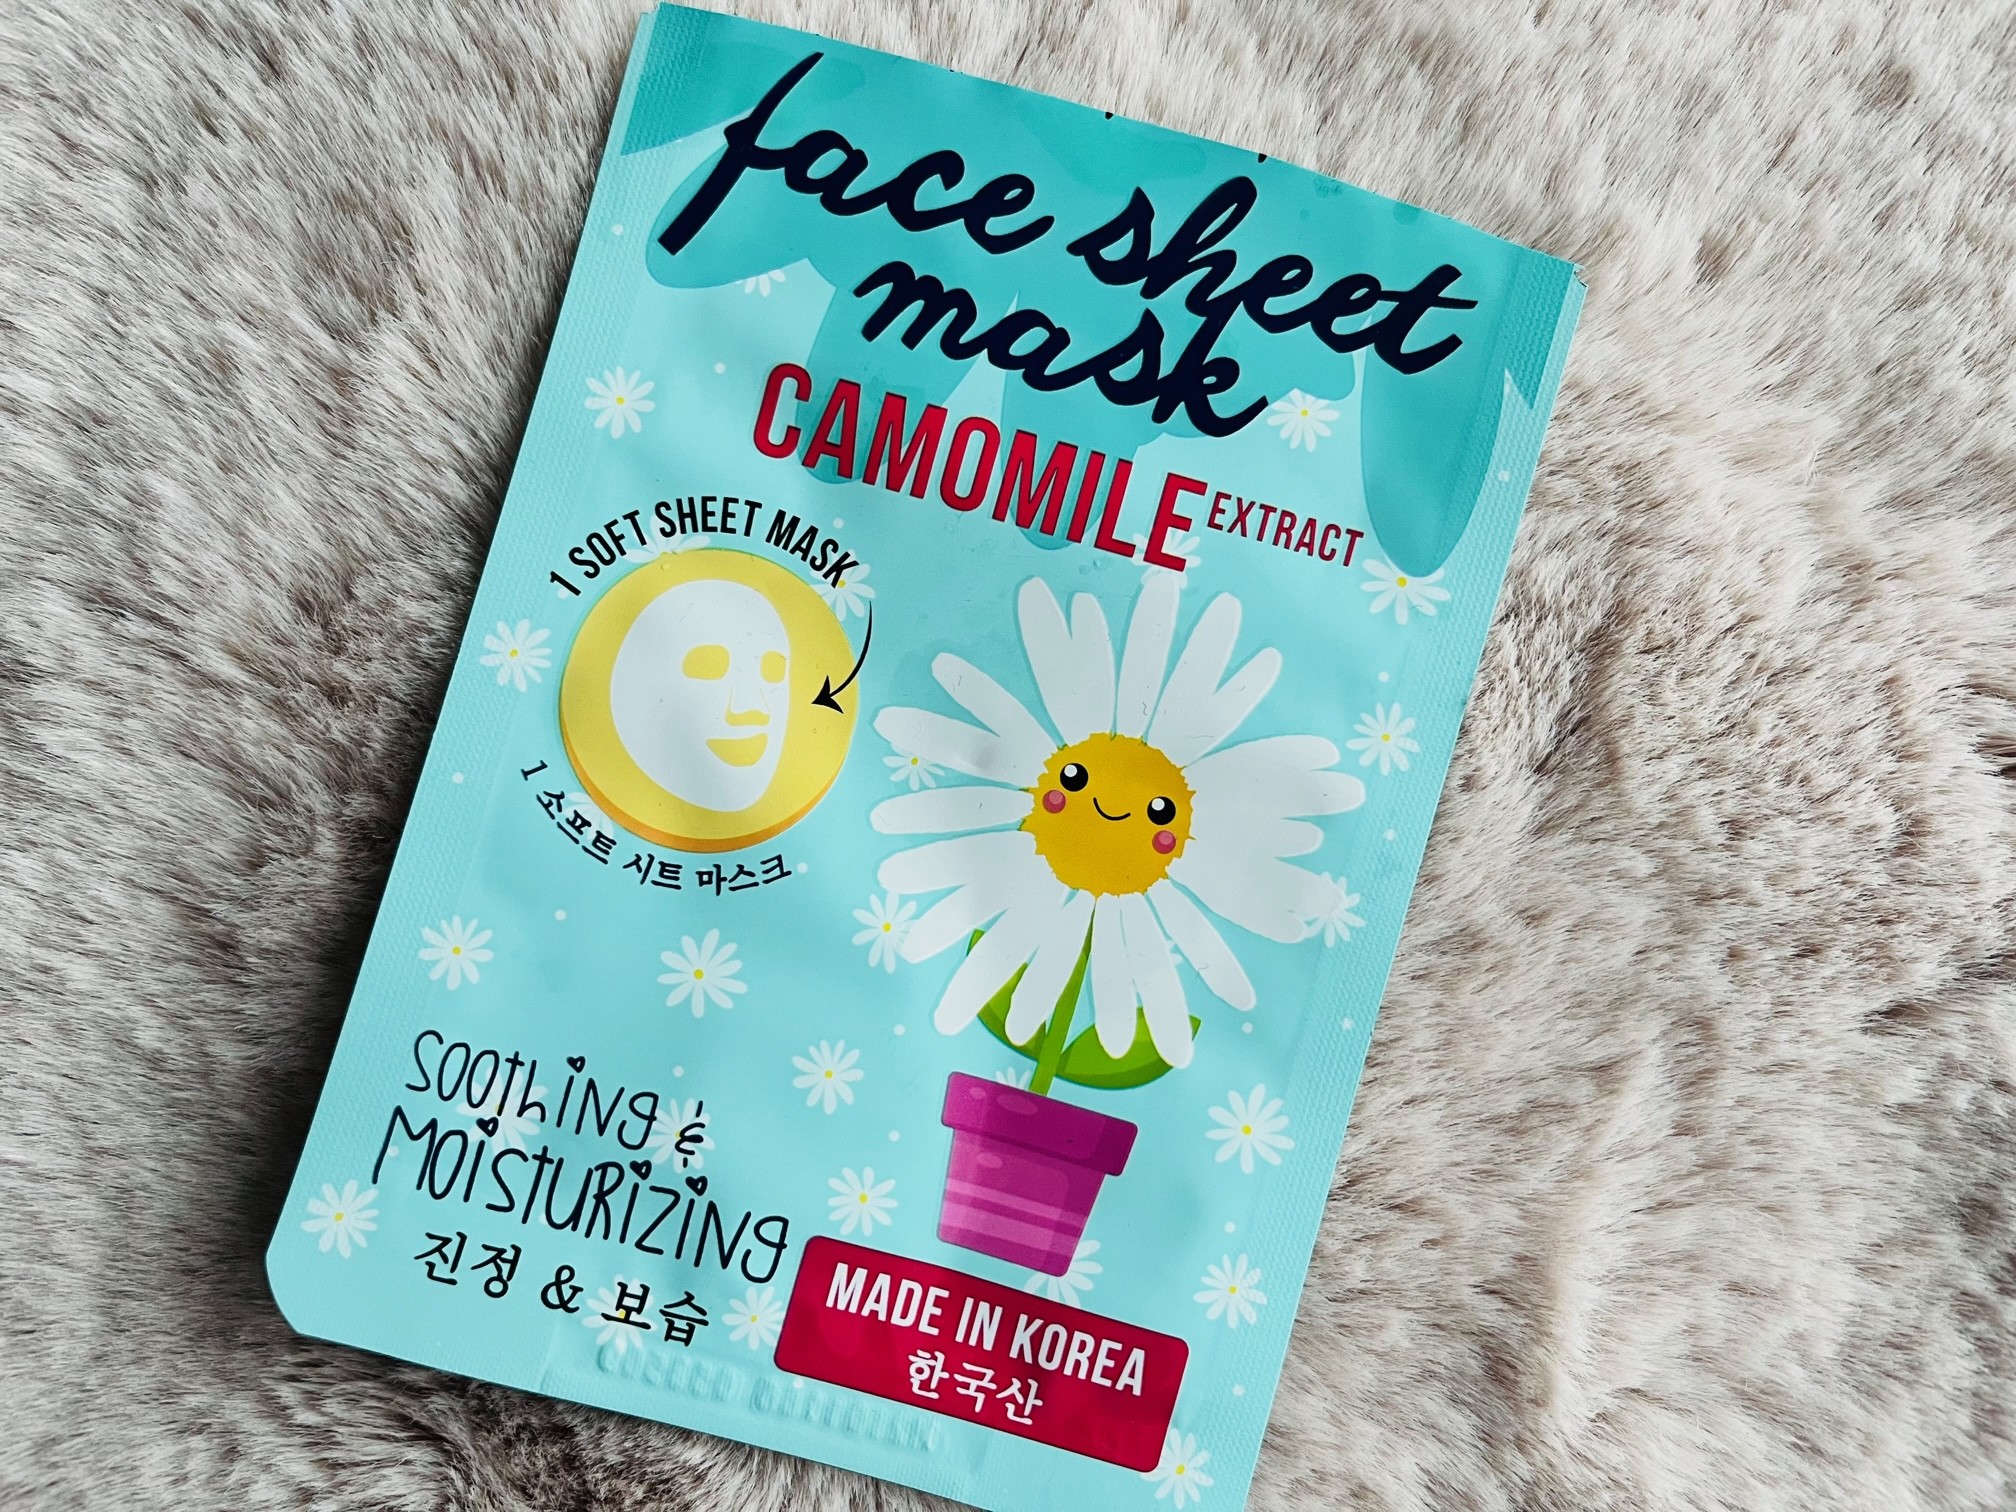 face sheet mask camomile extract